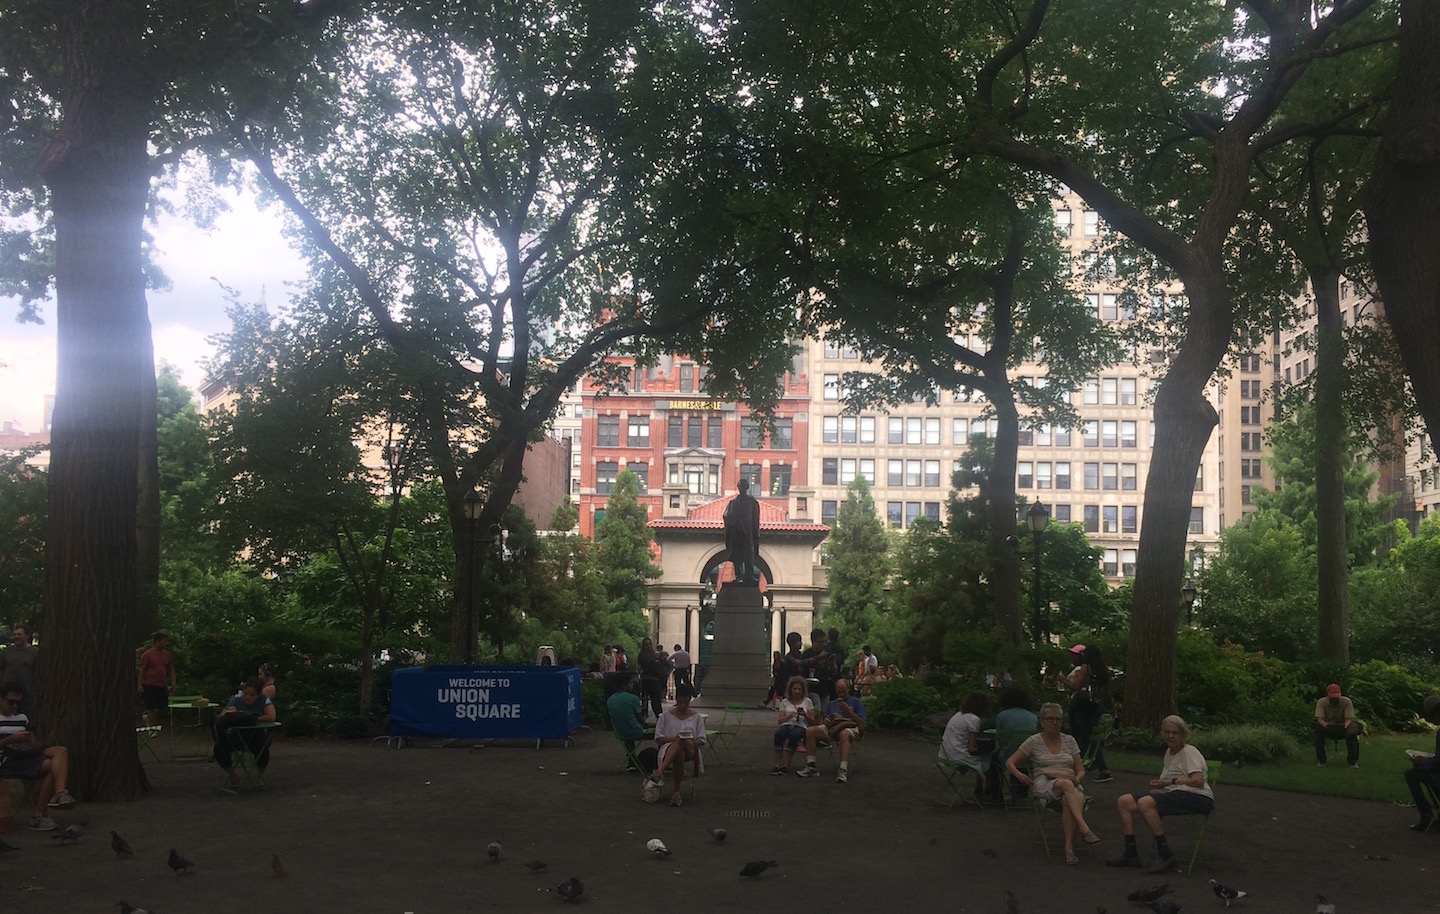 Inside the parks of Union Square with spectators watching the pigeons and enjoying the shade of the trees.